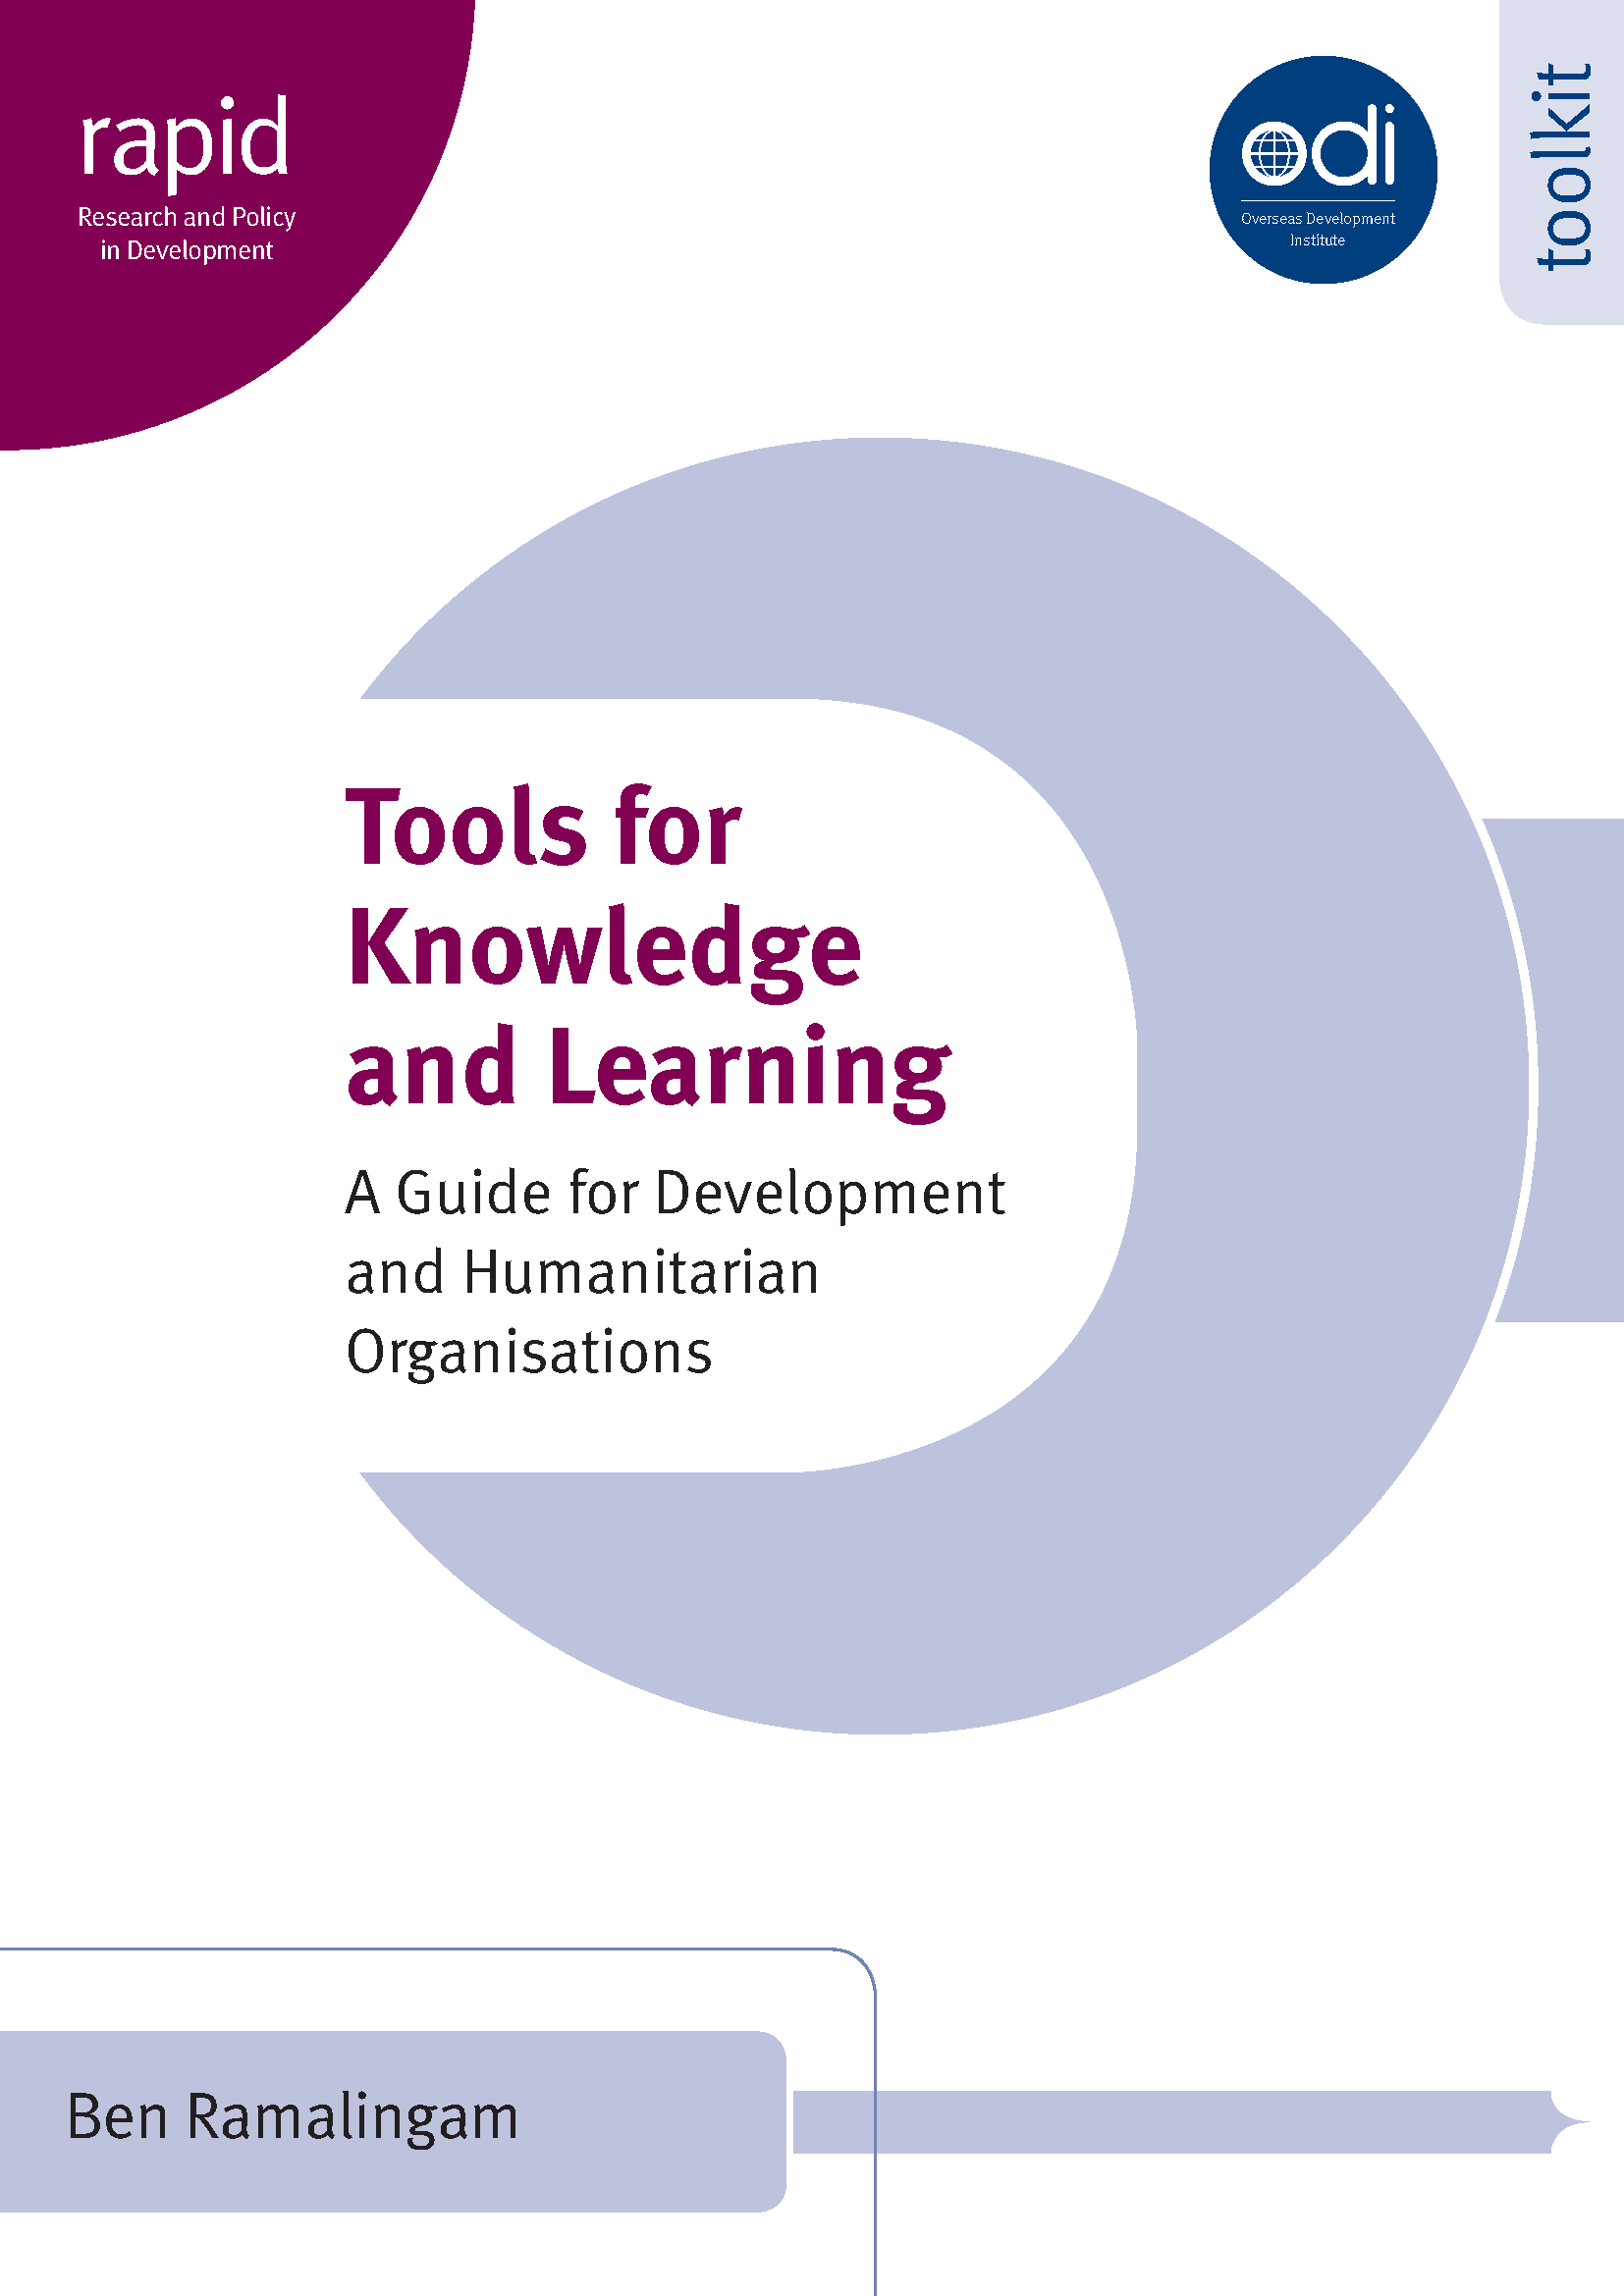 An image of the cover of "Tools for Knowledge and Learning" resource